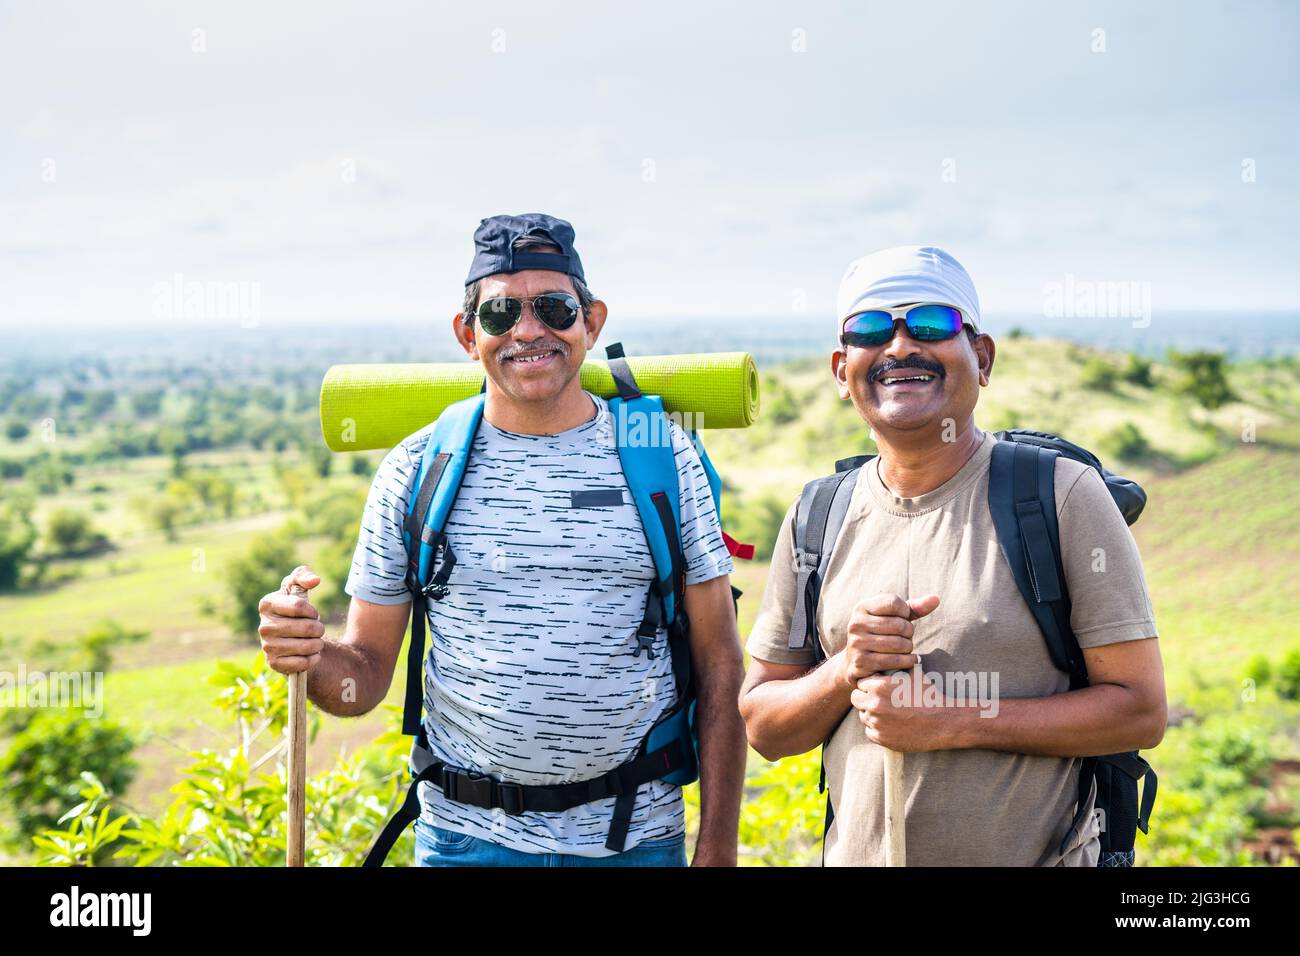 Happy smiling hikers or travellers with backpack looking at camera while trekking on mountain - concept of friendship, relaxation and leisure Stock Photo